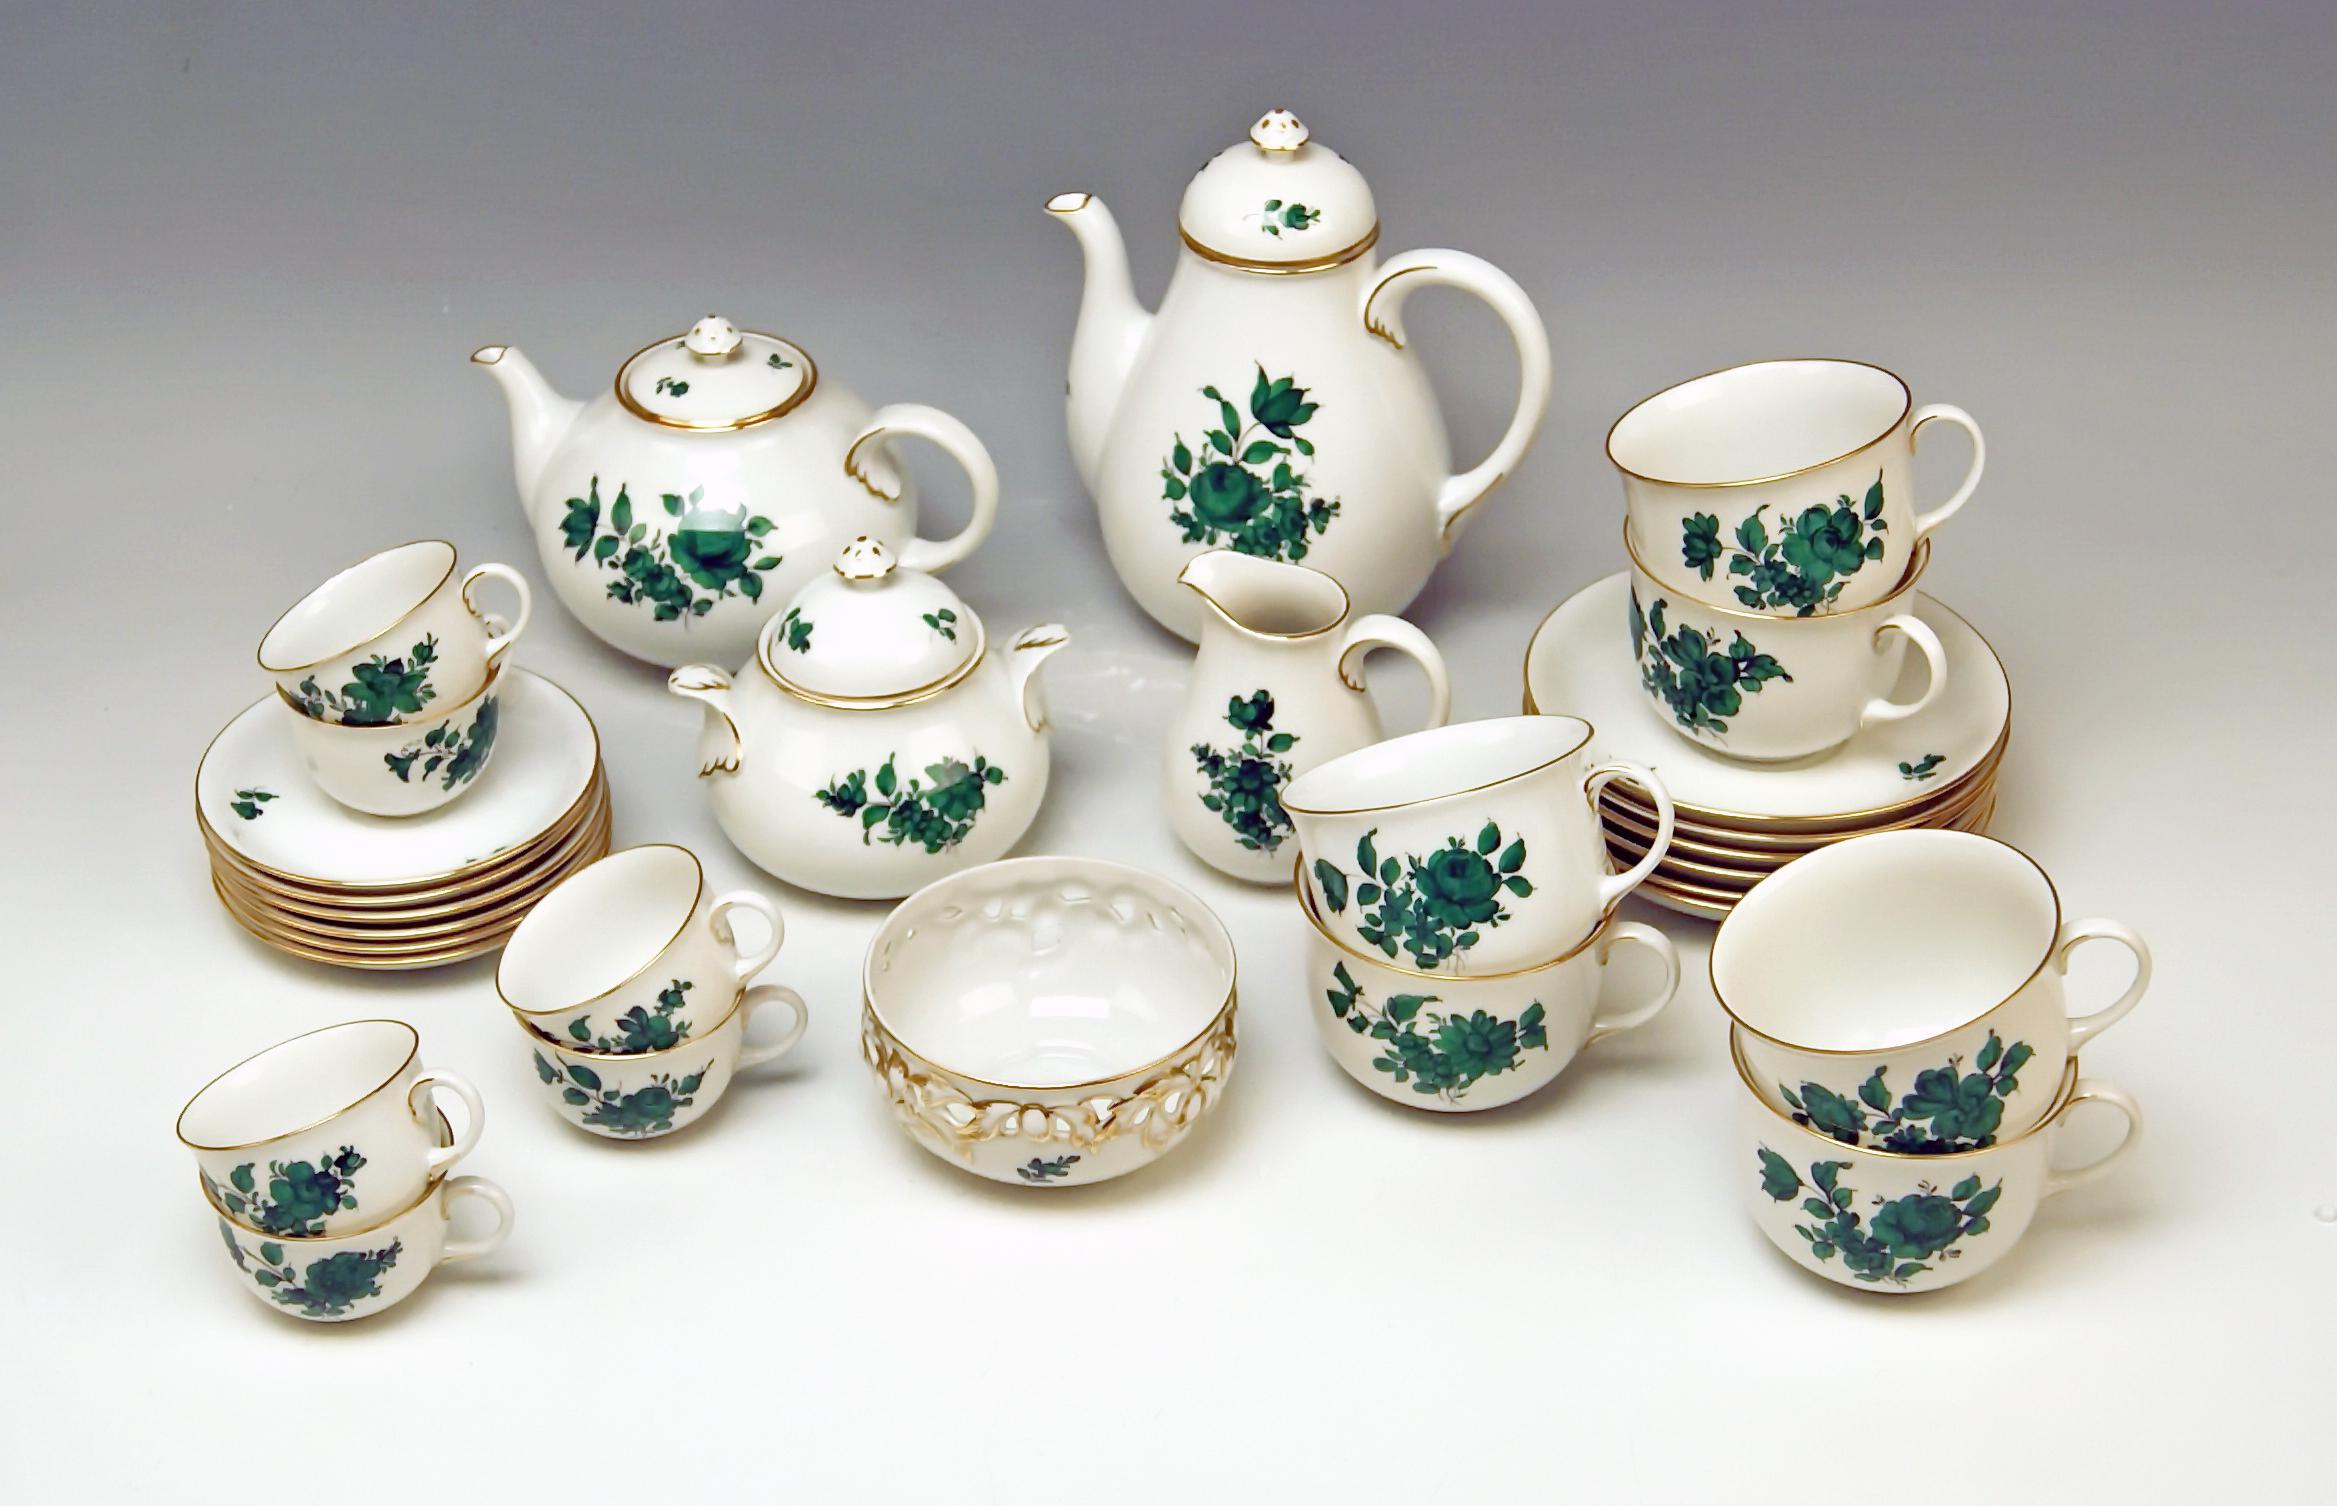 We invite you here to look at a splendid as well as nicest Augarten Vienna Mocha & Tea Set for six persons: 
This Augarten tea set is of finest elegance due to its delicate green monochrome paintings depicting various flower's blossoms with leaves